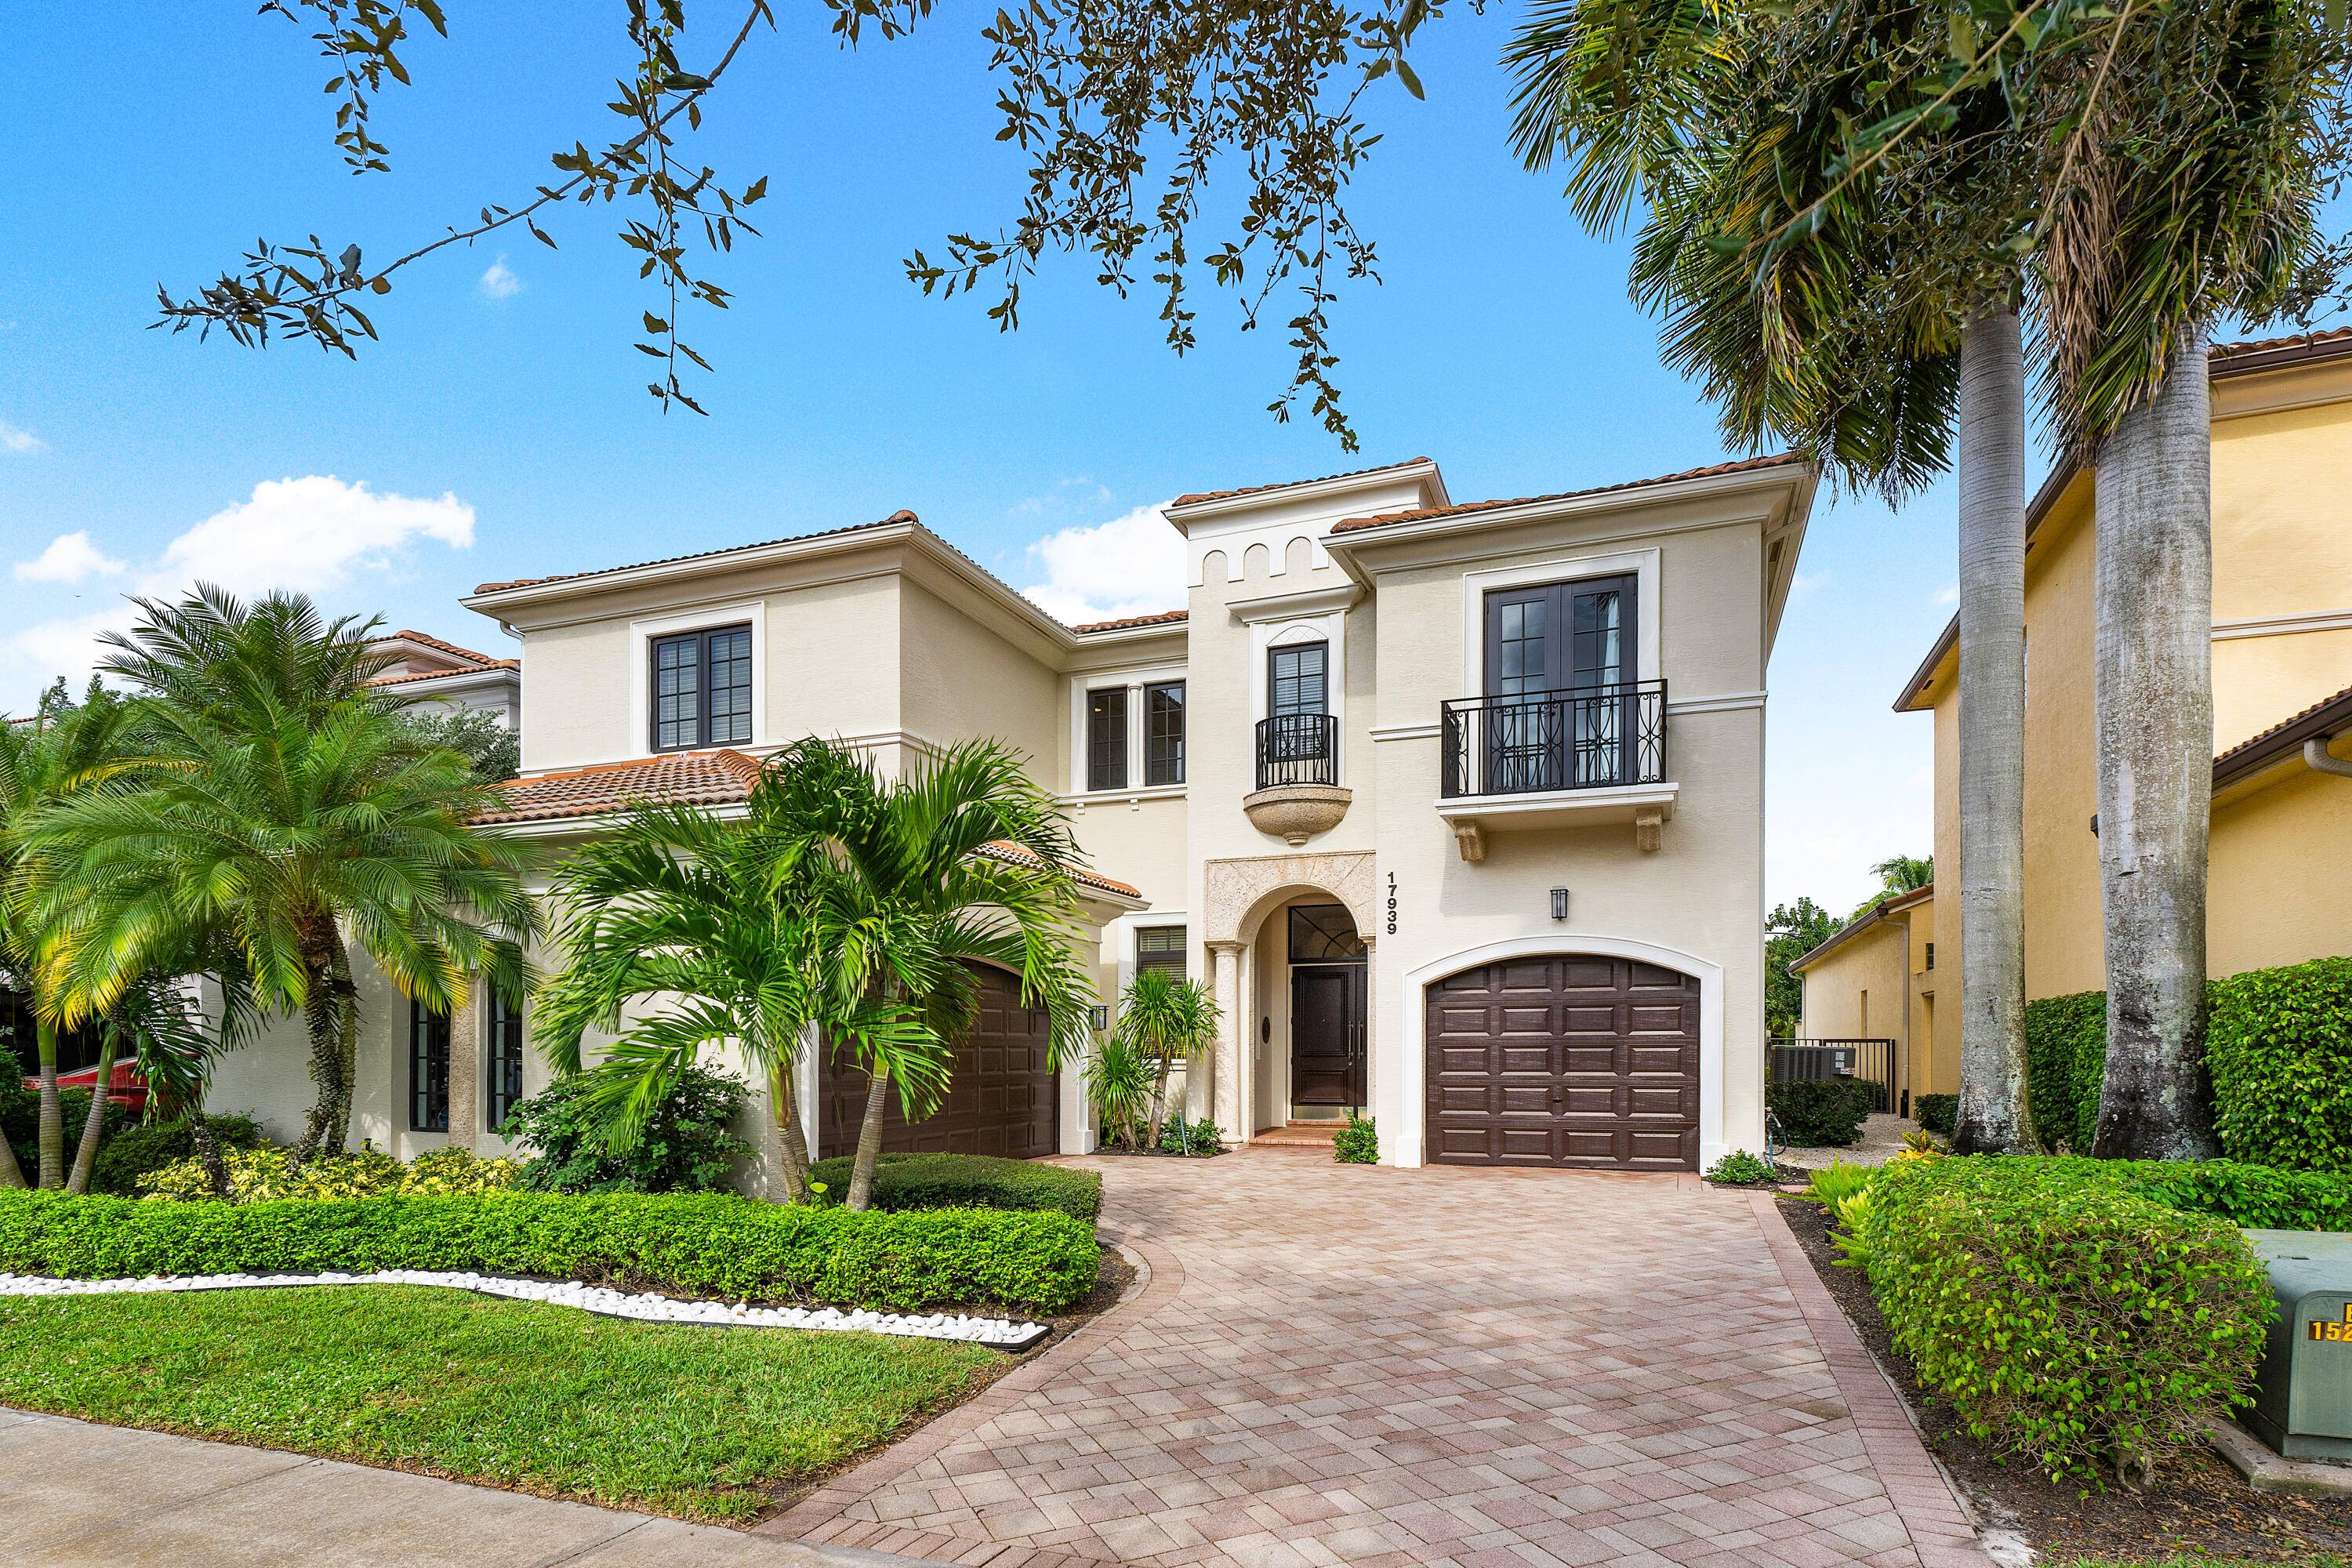 Discover luxury in this special custom lakefront Cordoba V model located in The Oaks at Boca Raton.